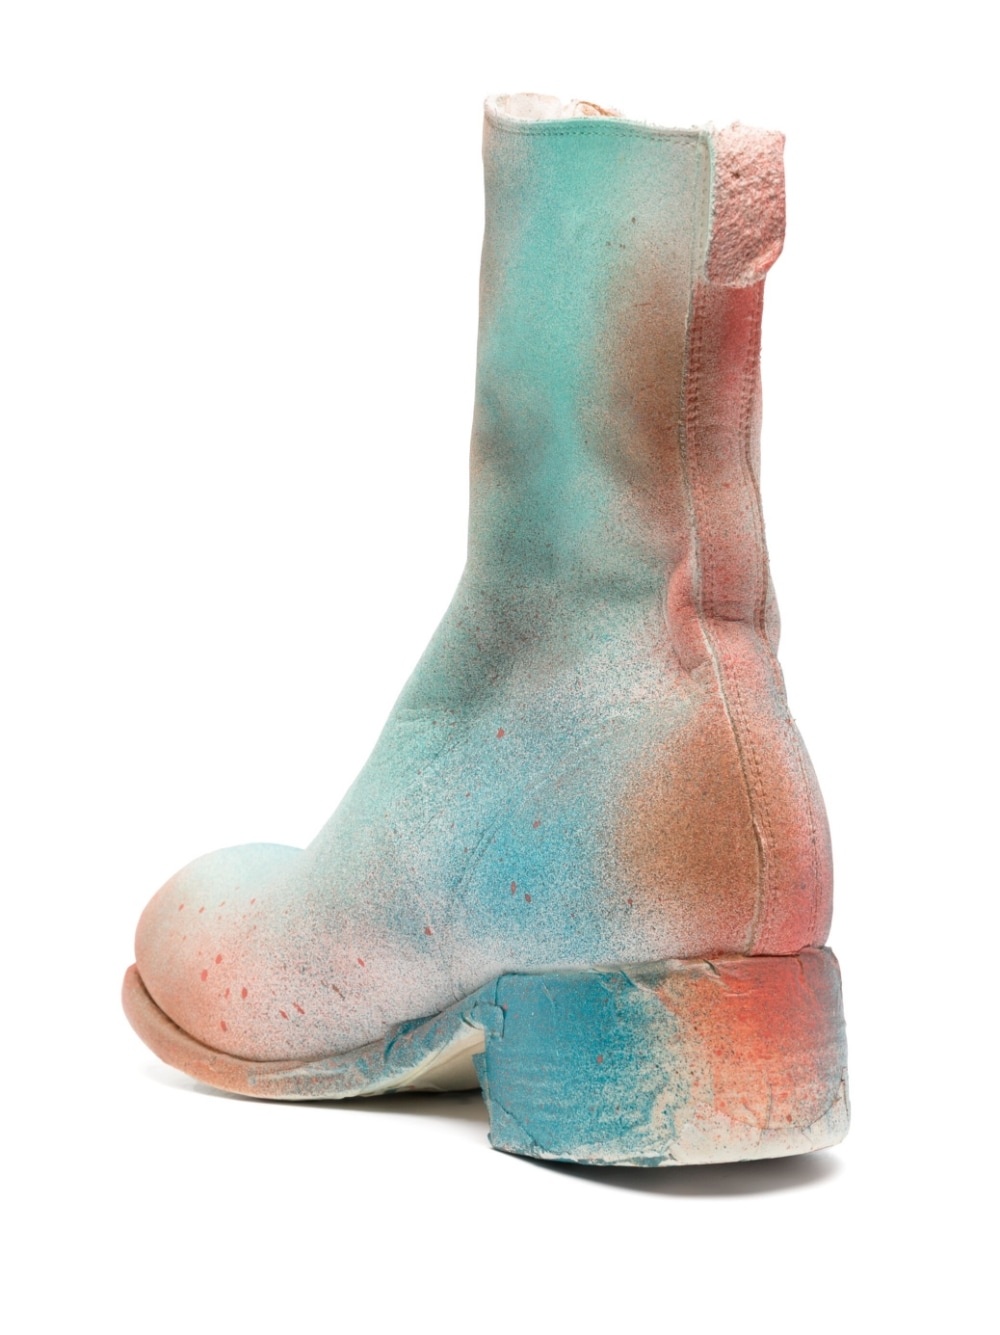 spray-paint effect boots - 3